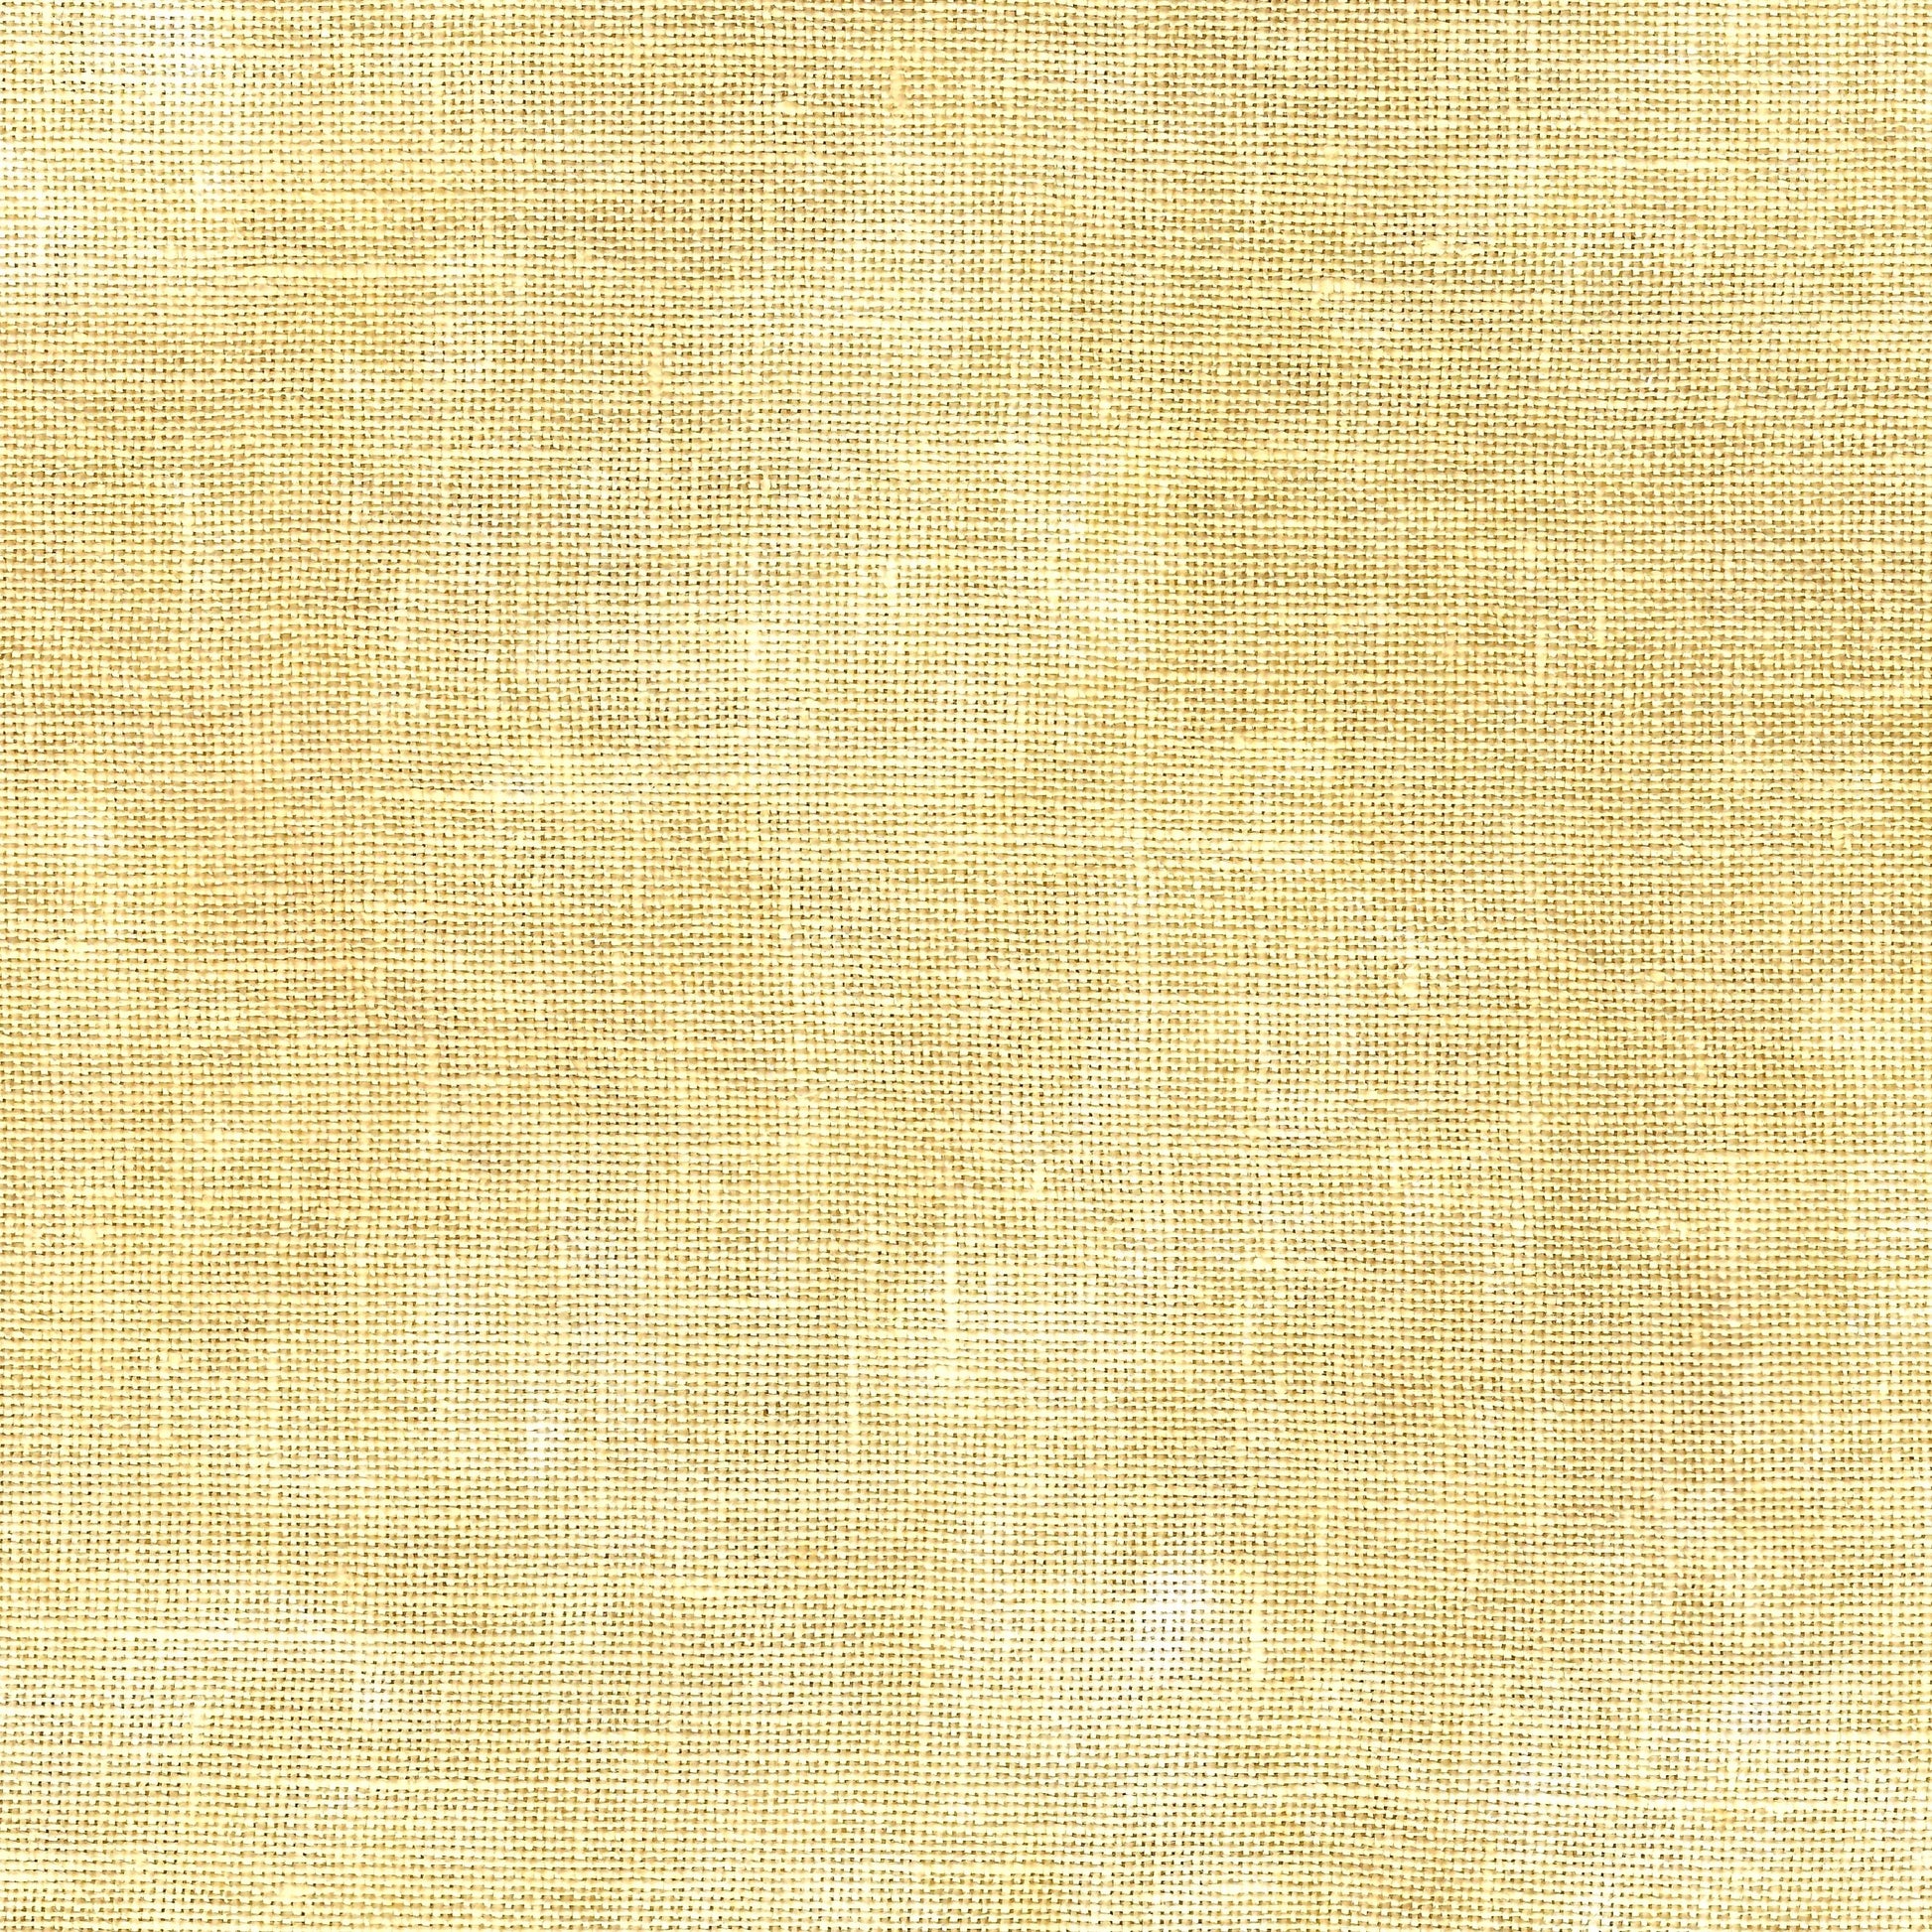 40 Count Linen - Golden Harvest - Atomic Ranch Cross Stitch Fabric, Fabric, The Crafty Grimalkin - A Cross Stitch Store